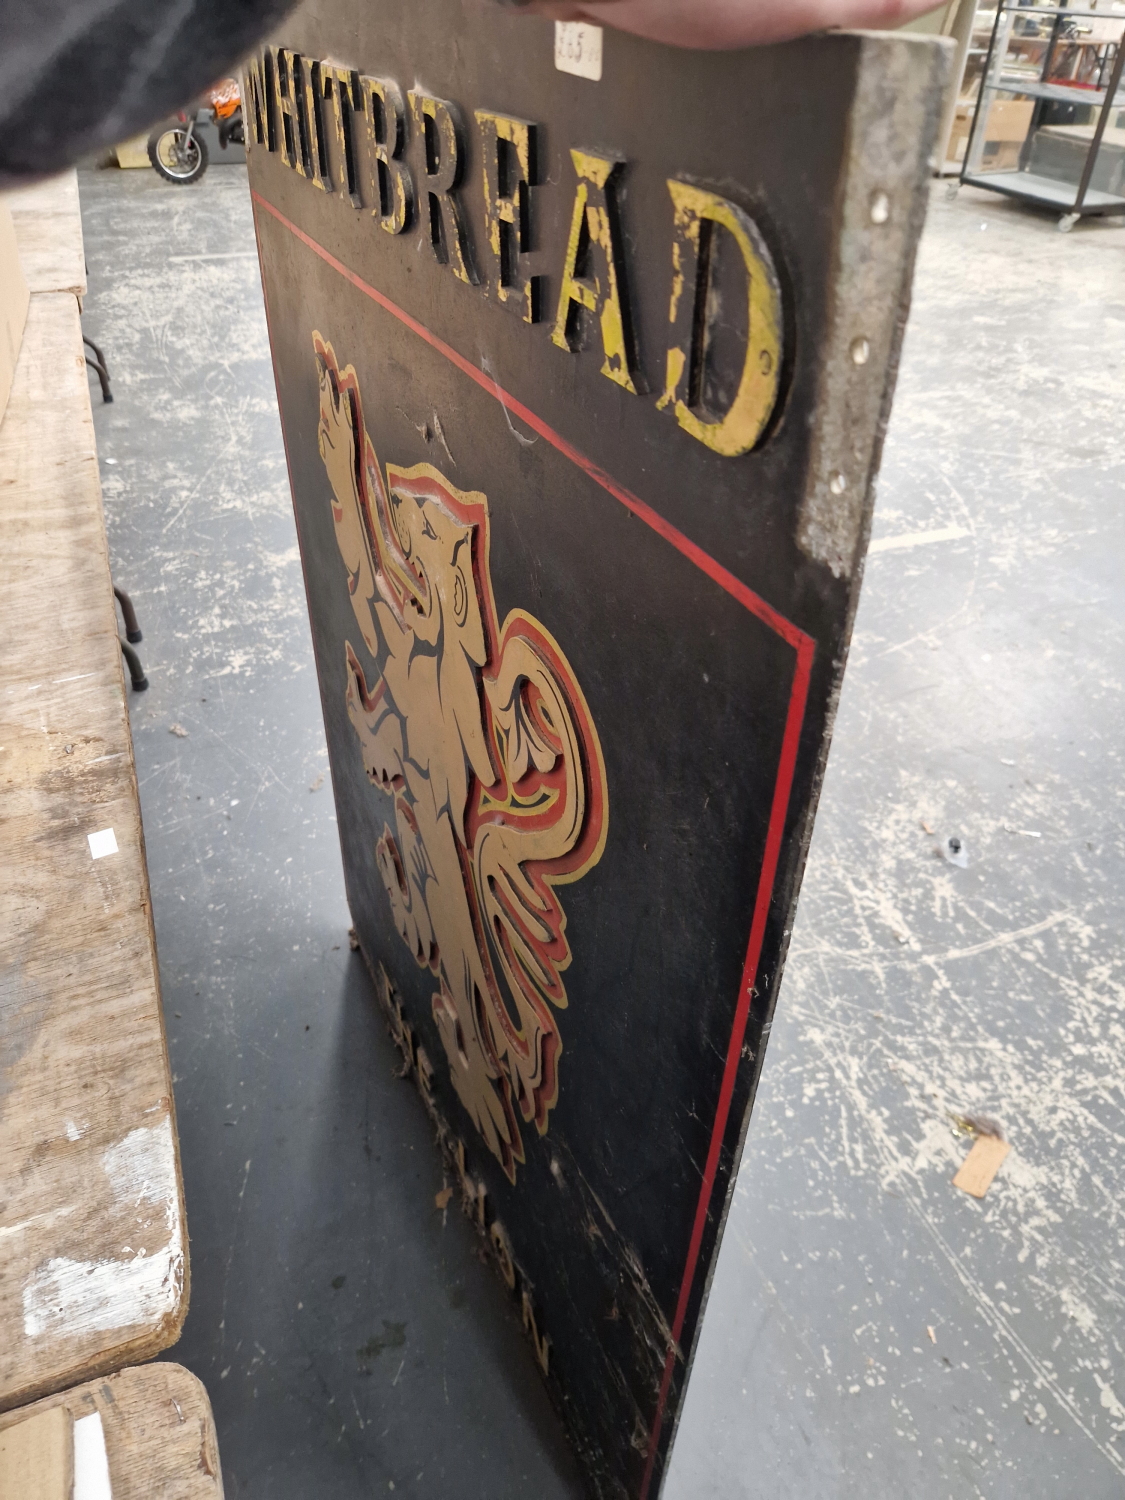 A VINTAGE PUB SIGN "THE LION" WHITBRED BREWERY. - Image 3 of 3